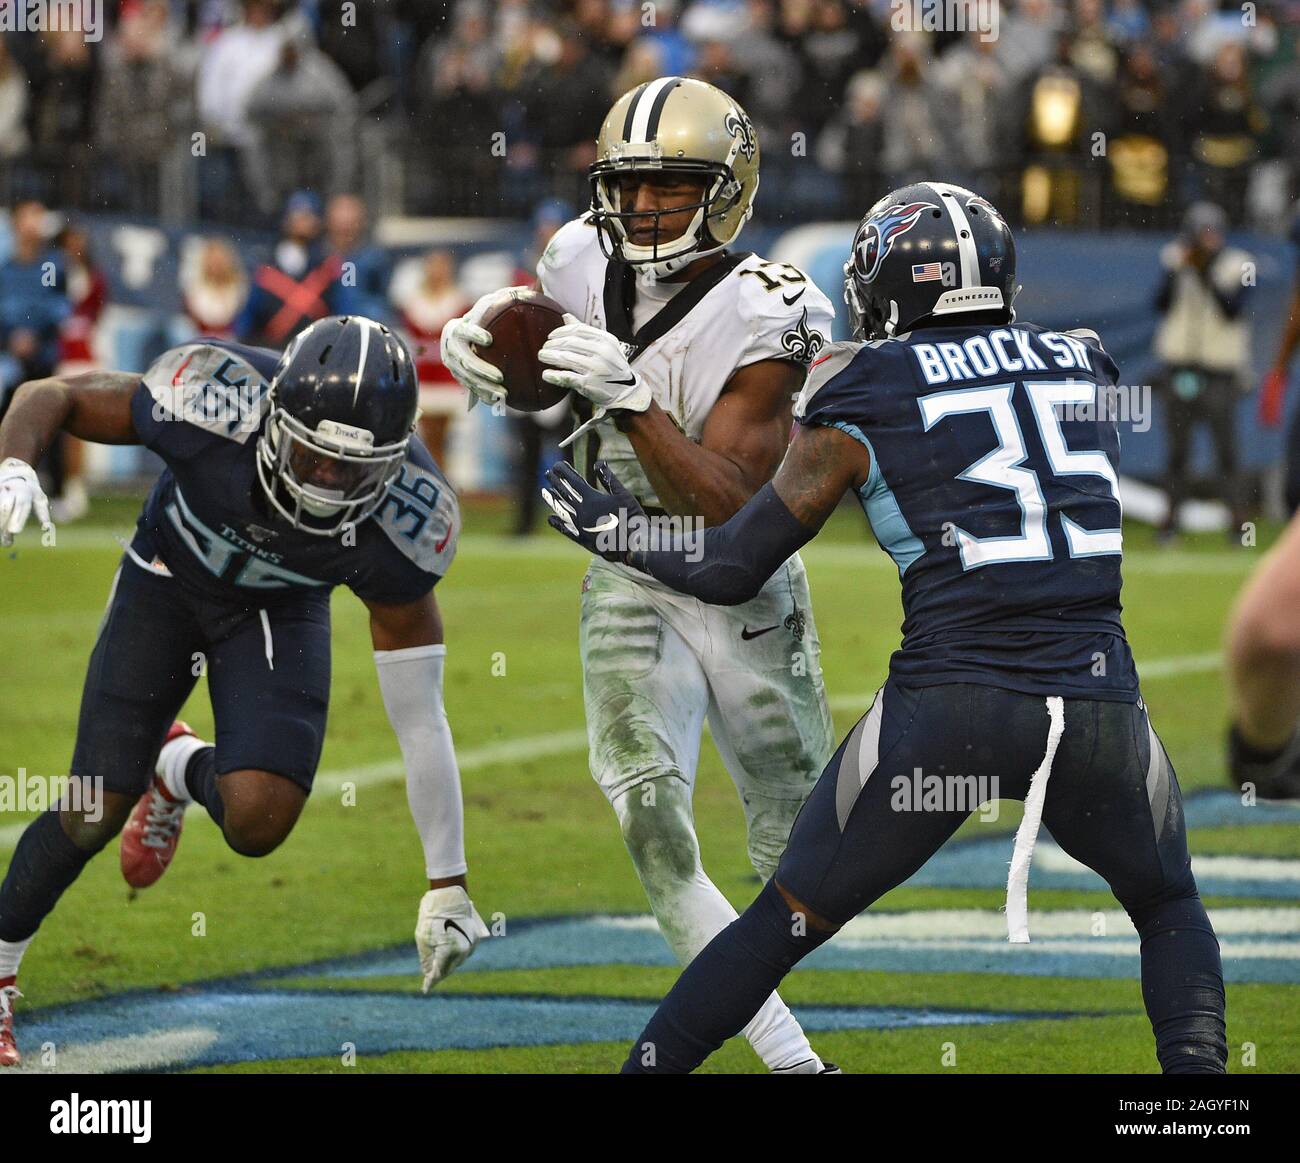 Nashville TN, USA. 22nd Dec, 2019. USA New Orleans Saints wide receiver Michael Thomas (13) makes a catch and breaks the single season receiving record held by former Indianapolis Colts receiver Marvin Harrison during a game between the New Orleans Saints and the Tennessee Titans at Nissan Stadium in Nashville TN. (Mandatory Photo Credit: Steve Roberts/CSM). Credit: csm/Alamy Live News Stock Photo